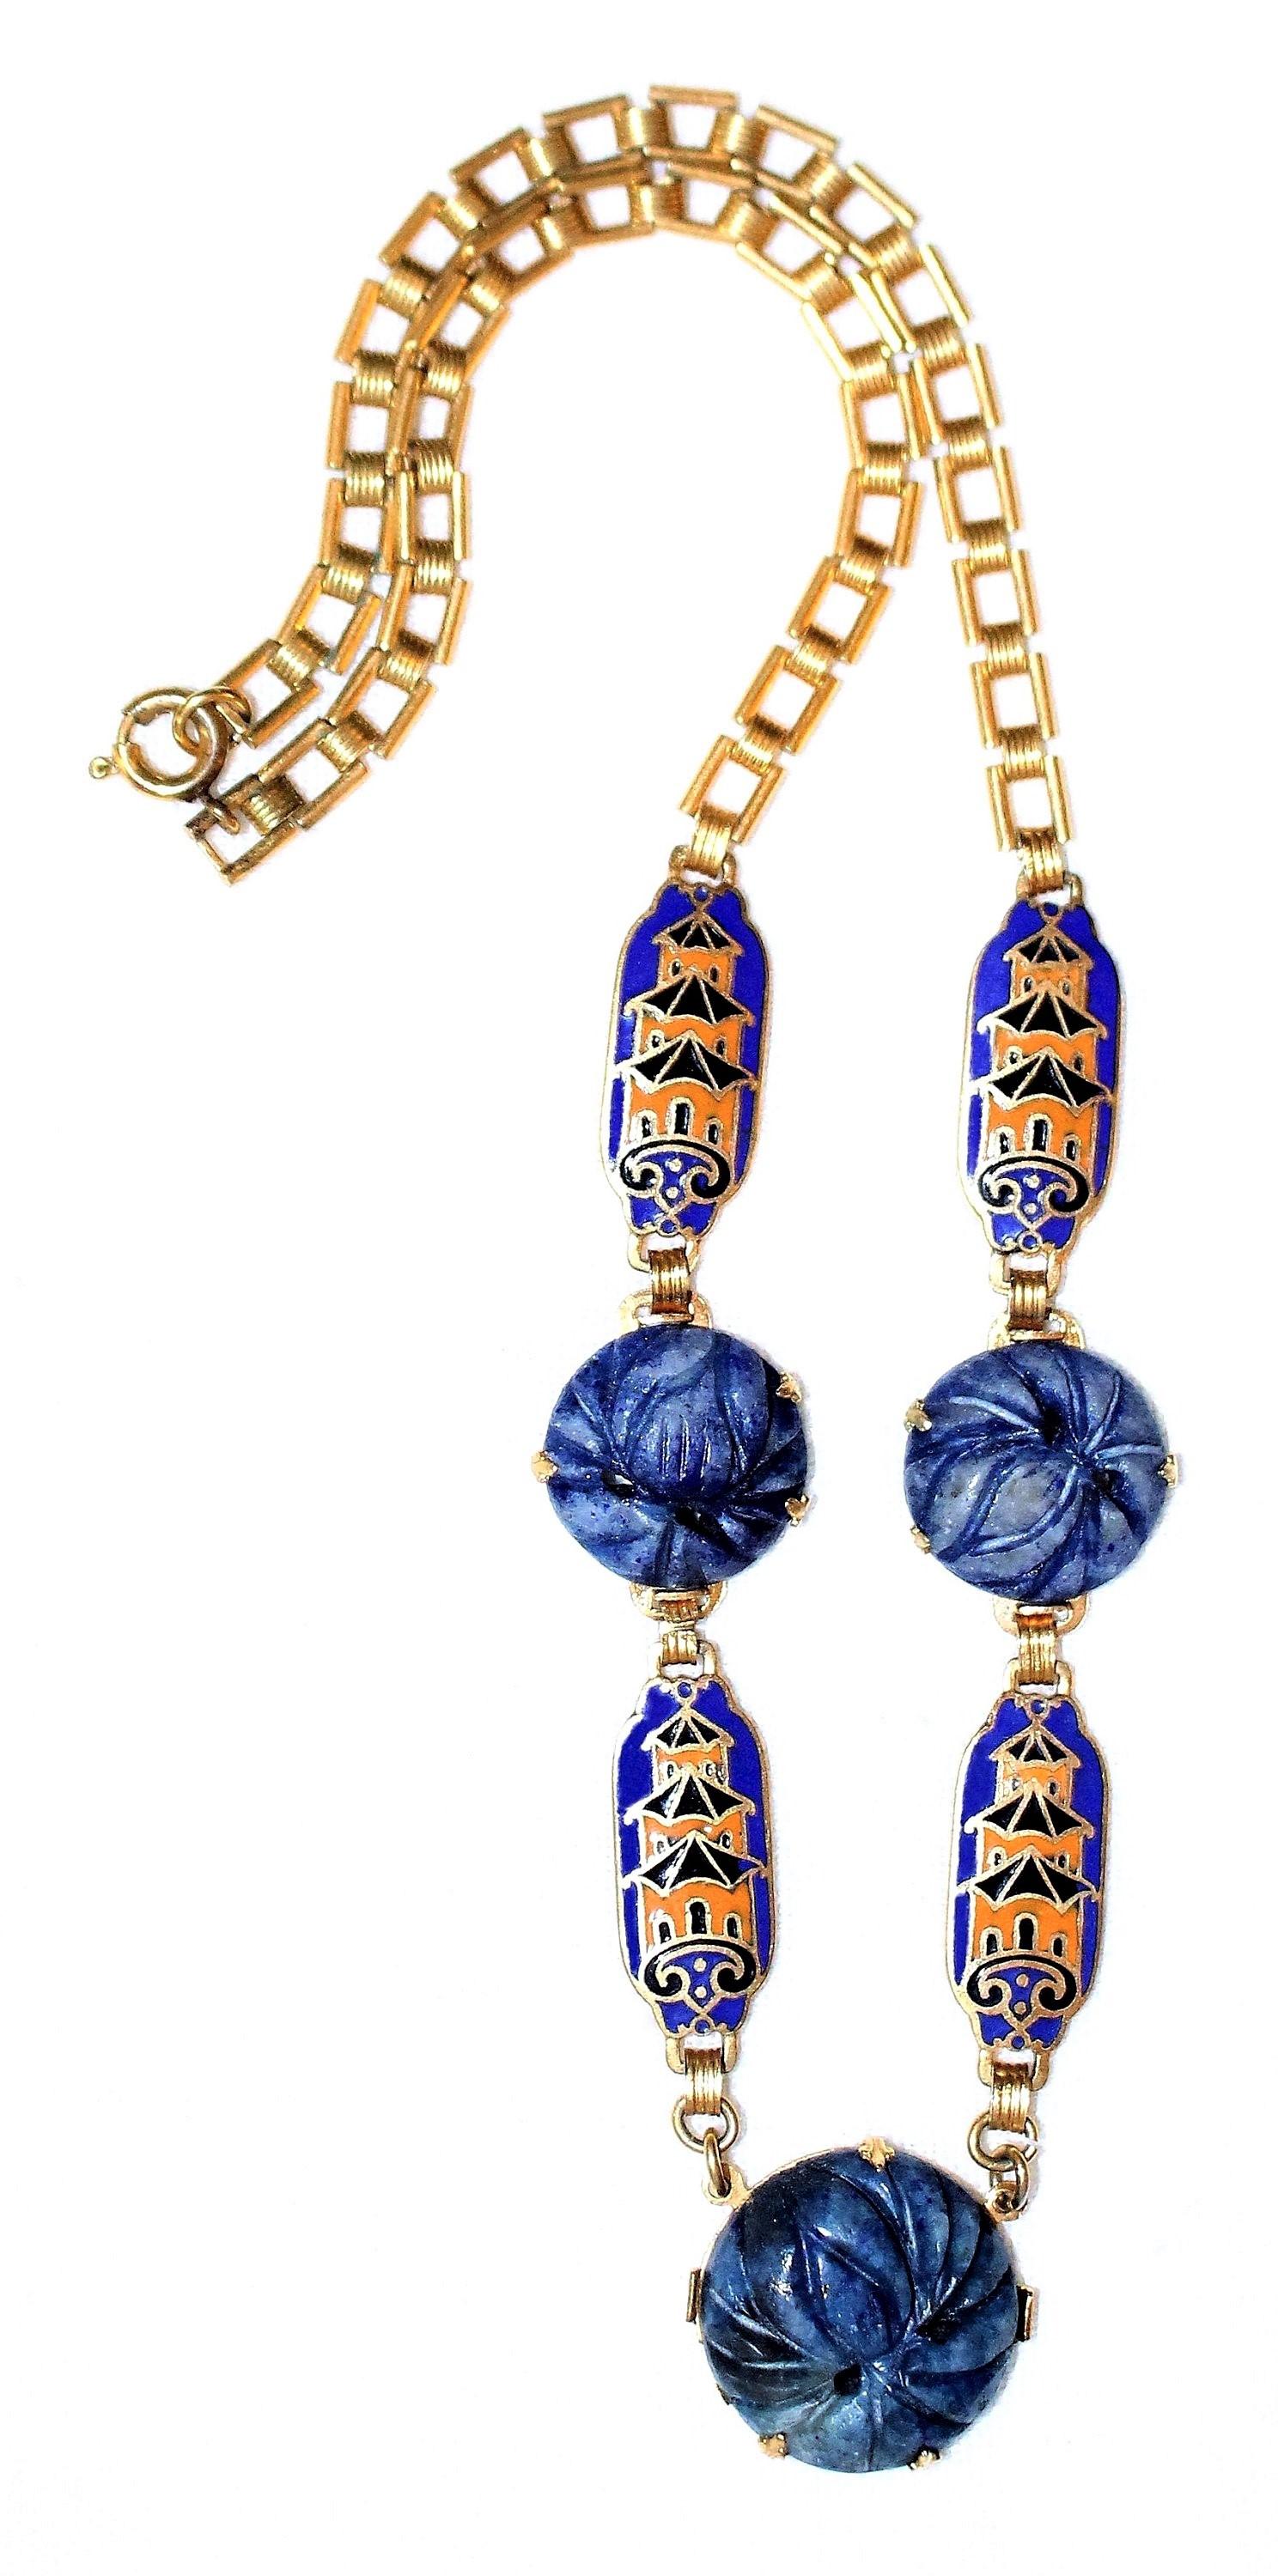 Circa 1940s gold tone chain link necklace prong set with three molded faux-sodalite stones and embellished with cloisonné enameled links in a pagoda motif.  The necklace measures 16